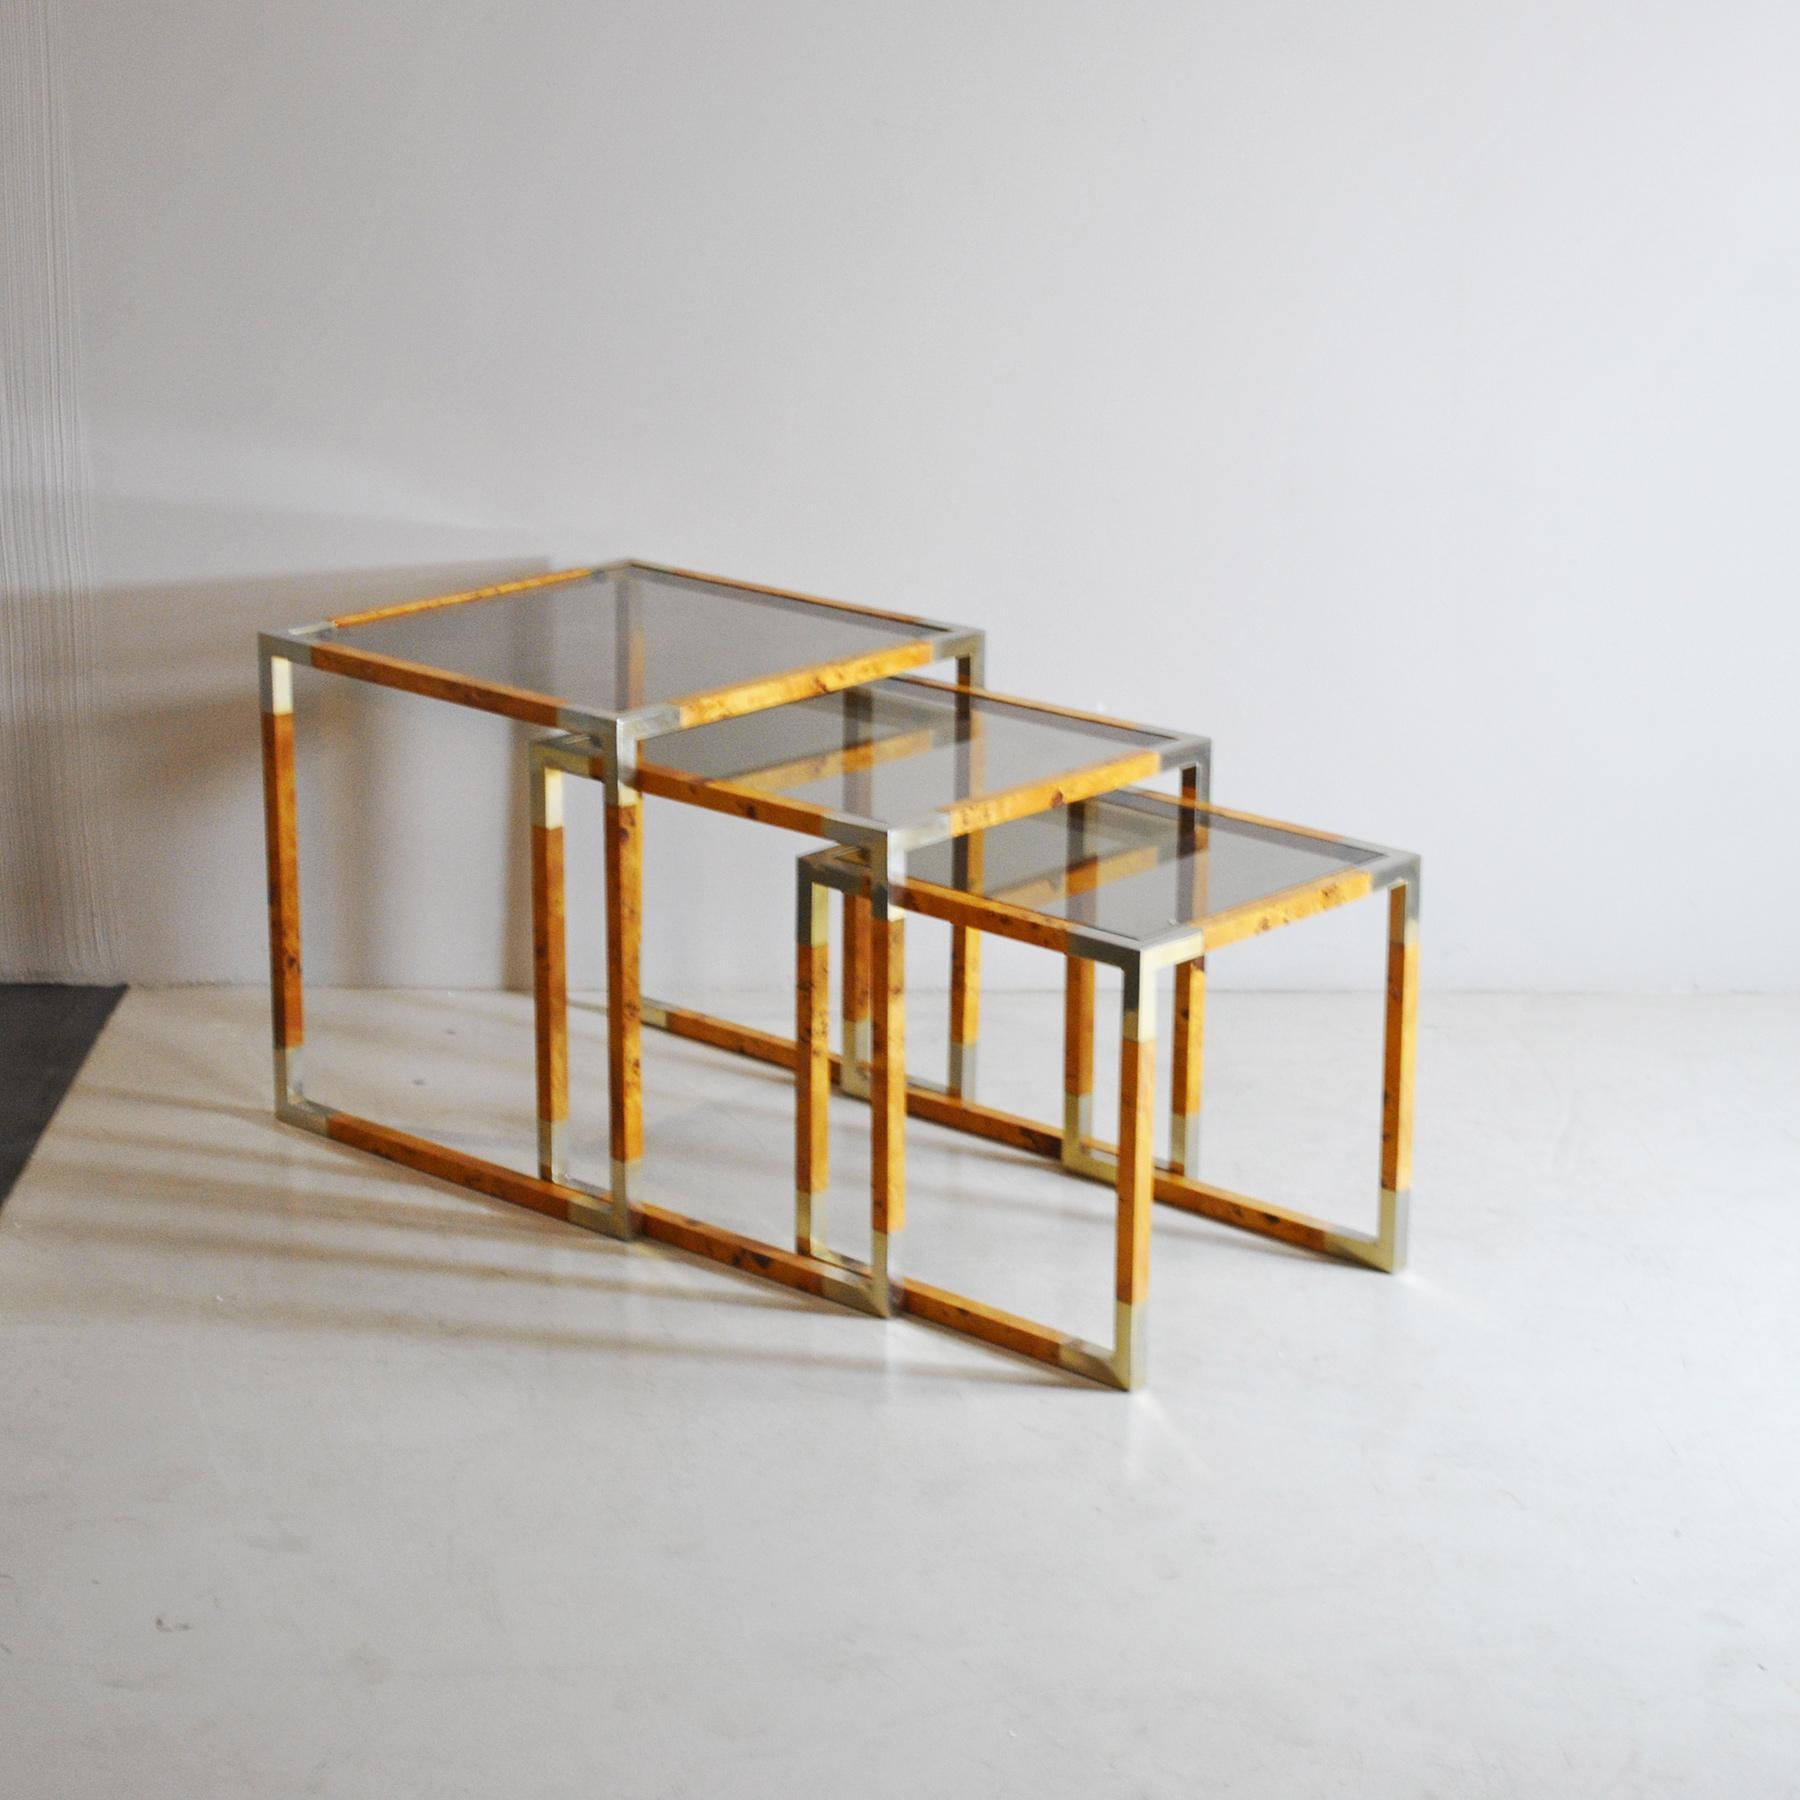 Trio of so-called nesting tables in the Tommaso Barbi style. Briar-root veneered wood structure, angles in metal and smoked glass, production from the late 1960s.

Medium size 42 x 42 x 42 cm
Small size 37 x 37 x 37 cm.